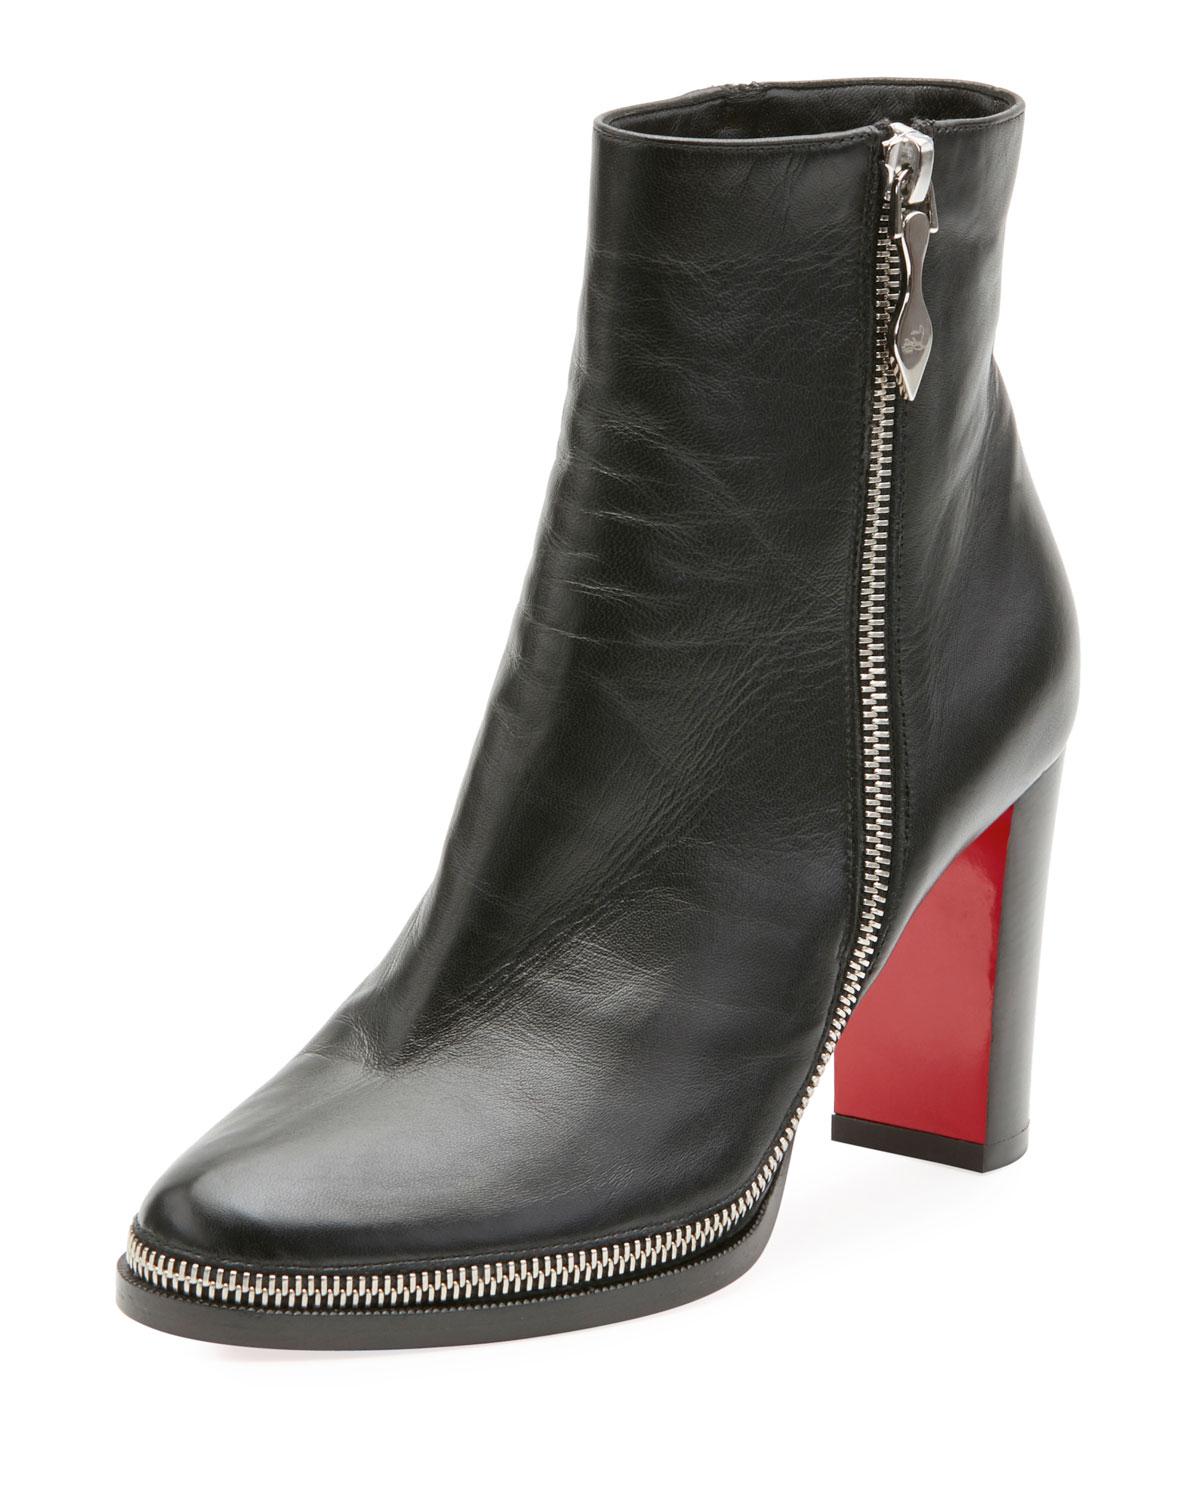 Christian Louboutin Leather Telezip Crinkled Red Sole Ankle Boot in Black - Lyst